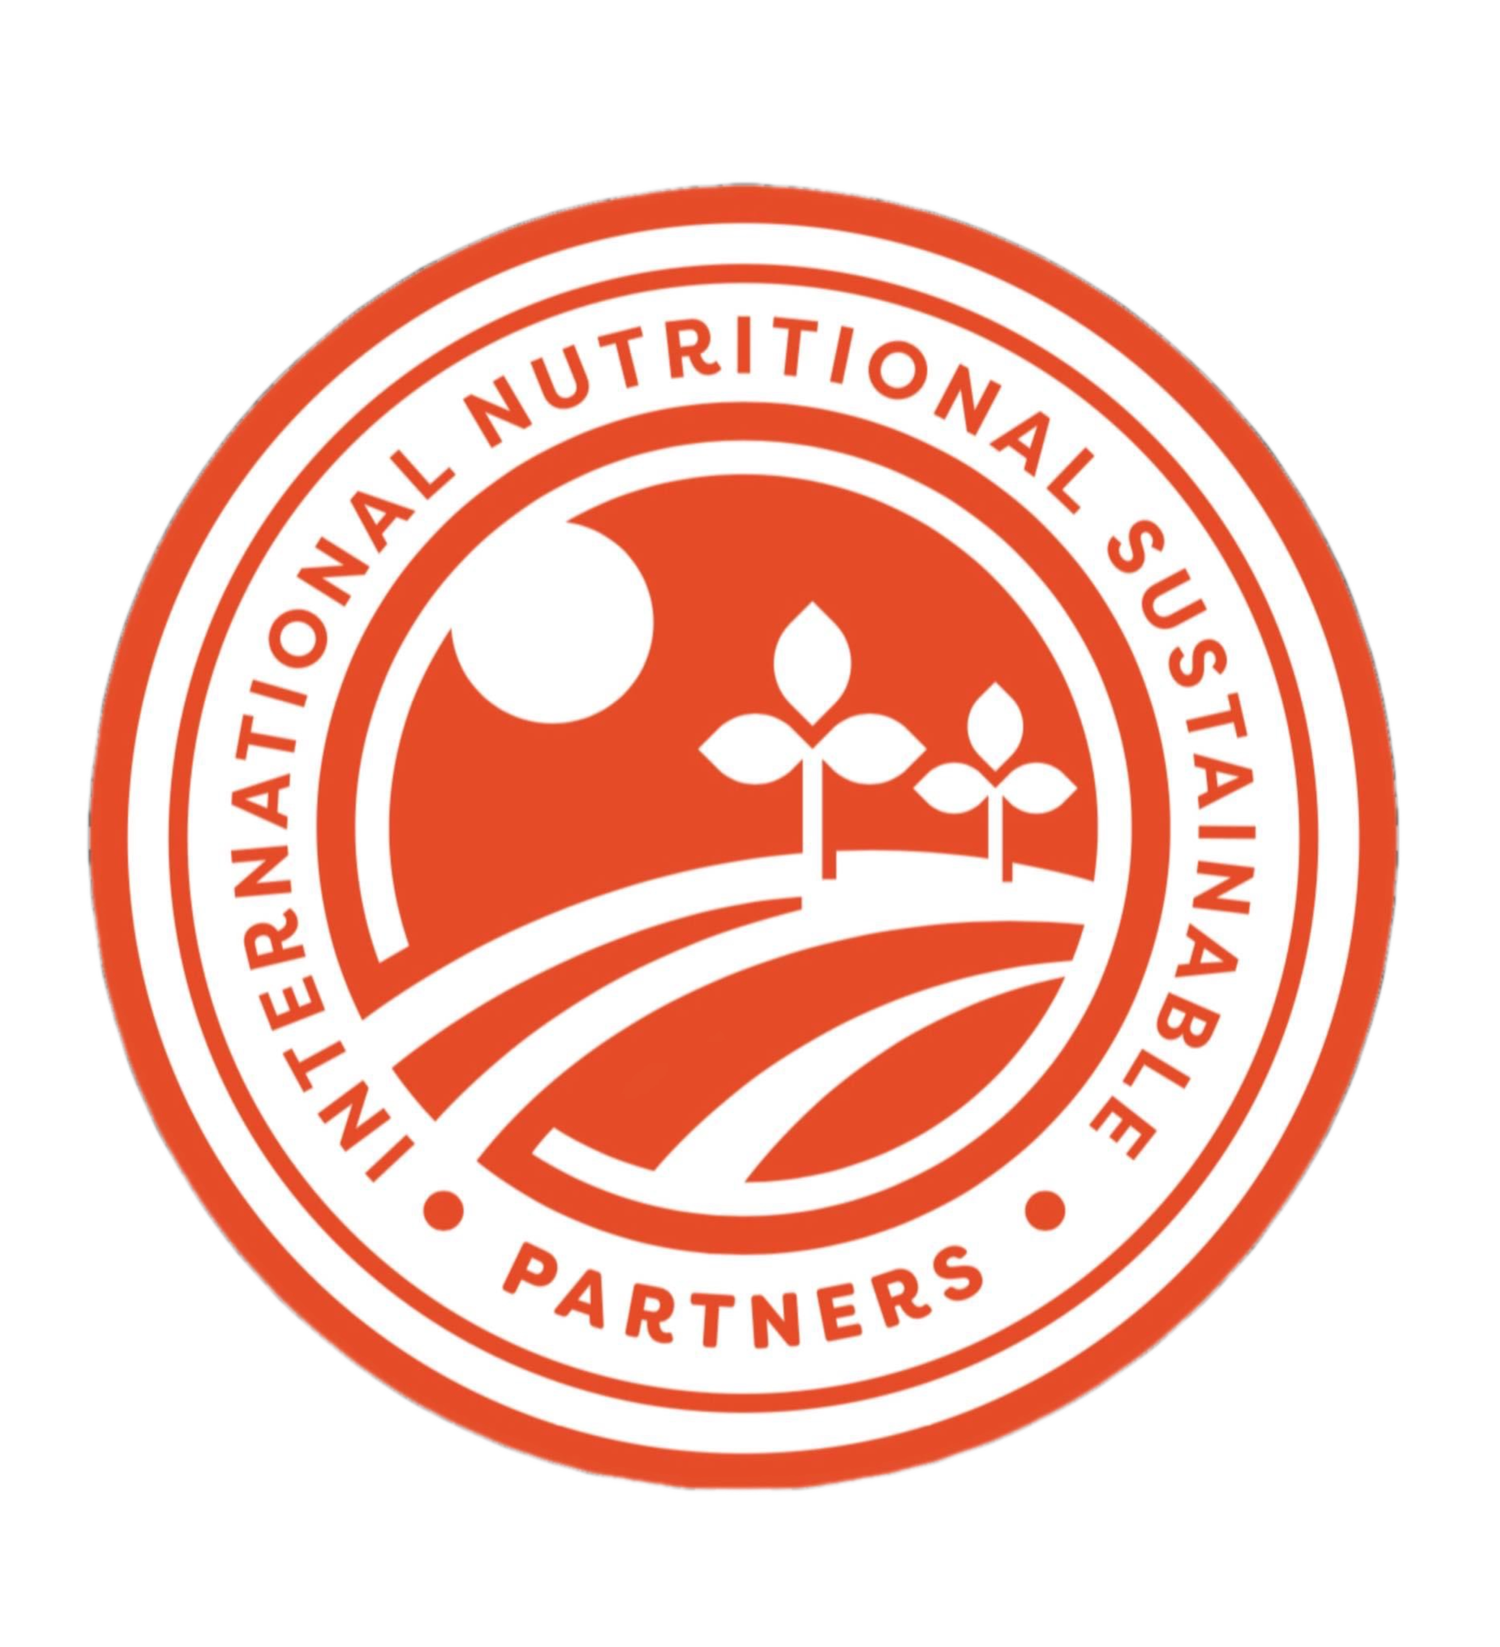 INSP - International Nutritional Sustainable Partners